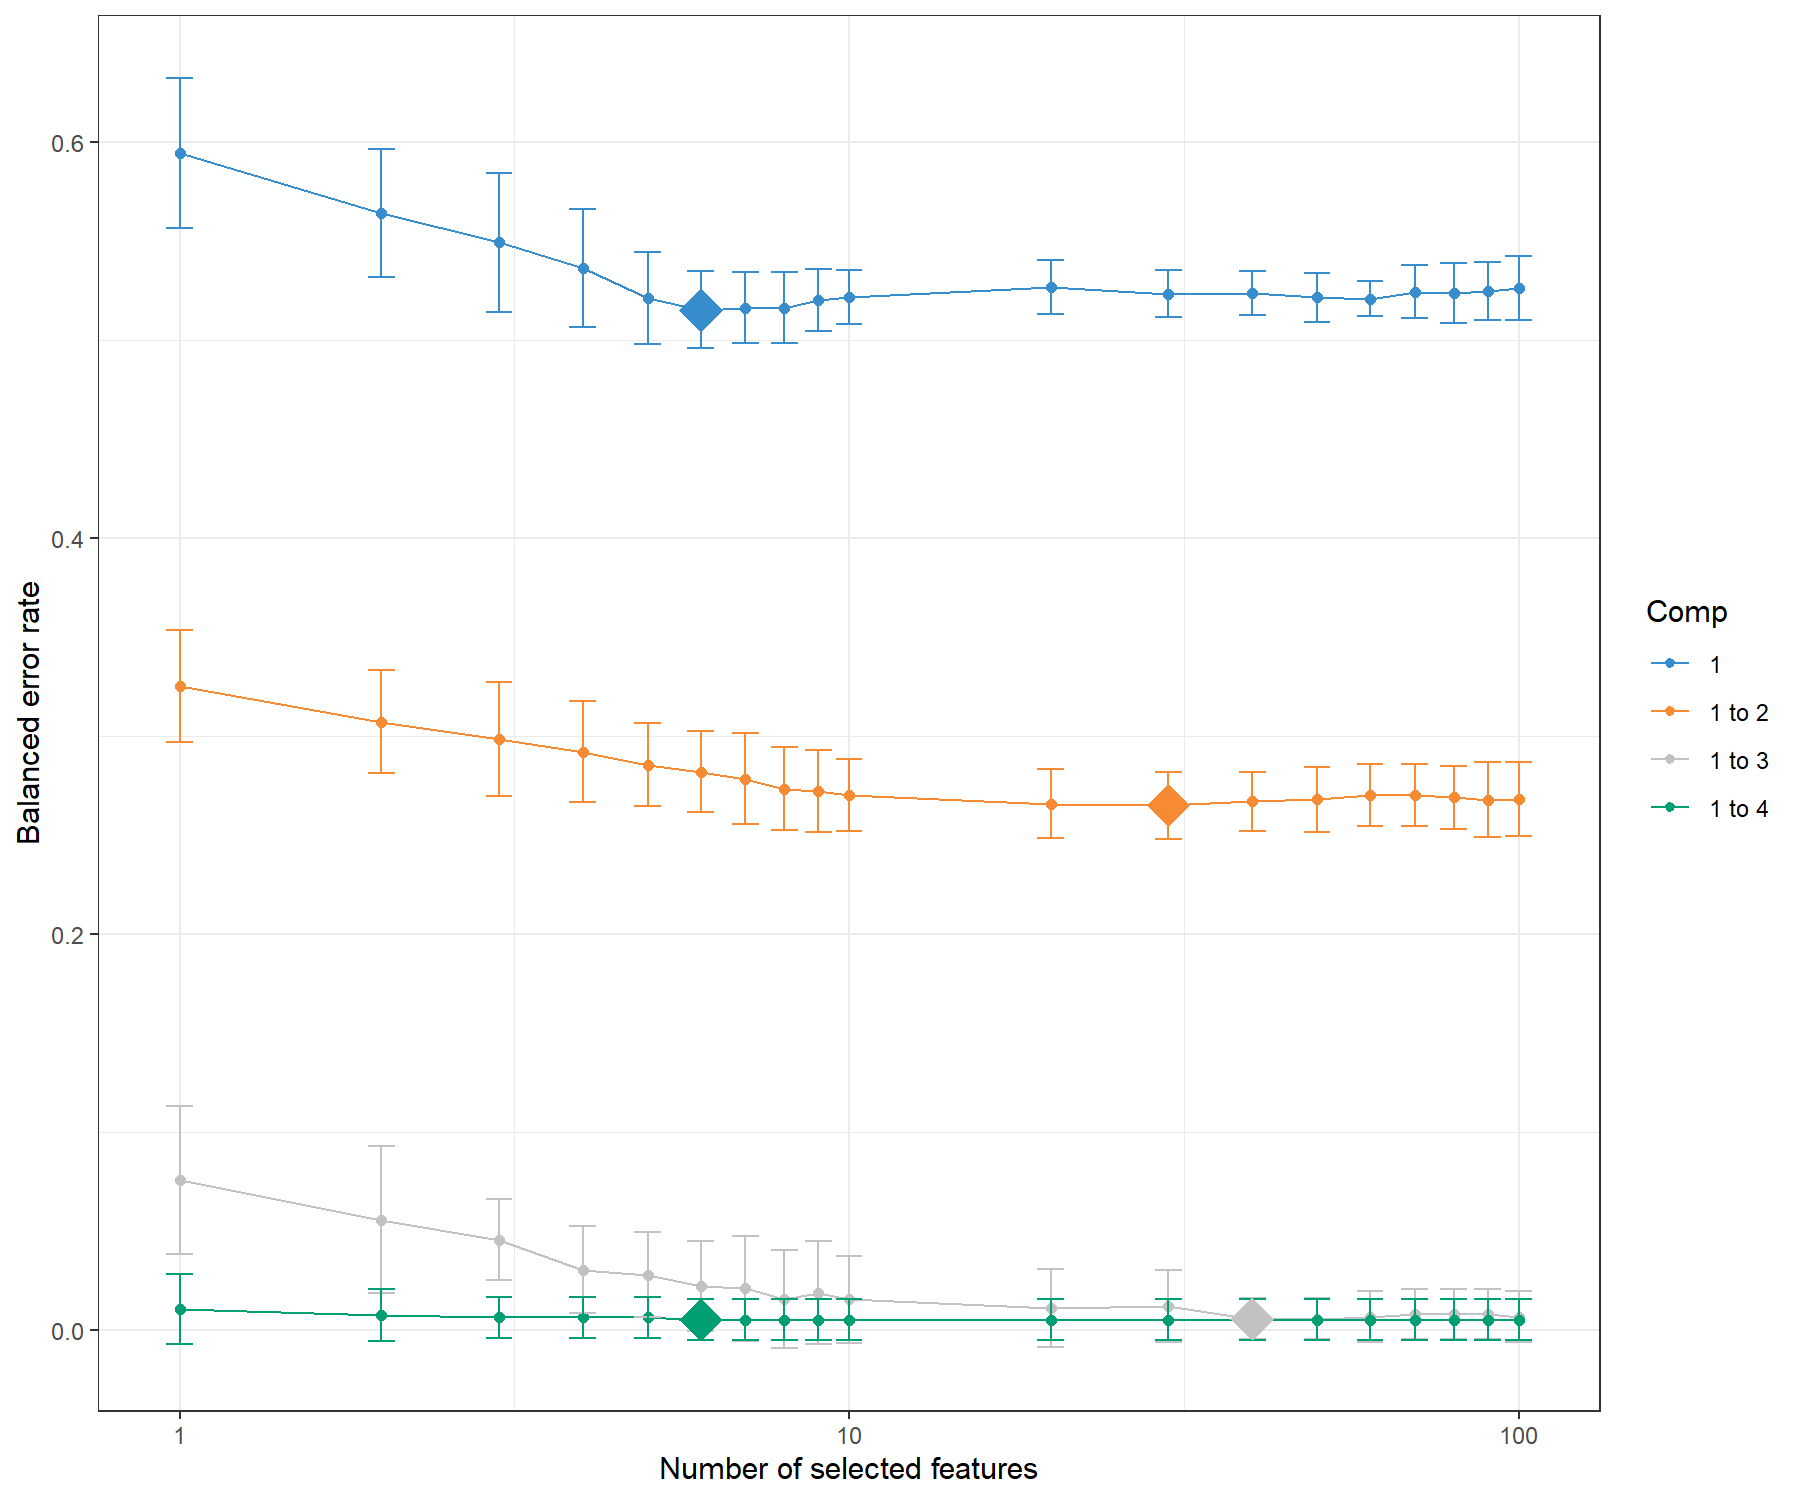 Tuning keepX for the sPLS-DA performed on the SRBCT gene expression data. Each coloured line represents the balanced error rate (y-axis) per component across all tested keepX values (x-axis) with the standard deviation based on the repeated cross-validation folds. The diamond indicates the optimal keepX value on a particular component which achieves the lowest classification error rate as determined with a one-sided \(t-\)test. As sPLS-DA is an iterative algorithm, values represented for a given component (e.g. comp 1 to 2) include the optimal keepX value chosen for the previous component (comp 1).